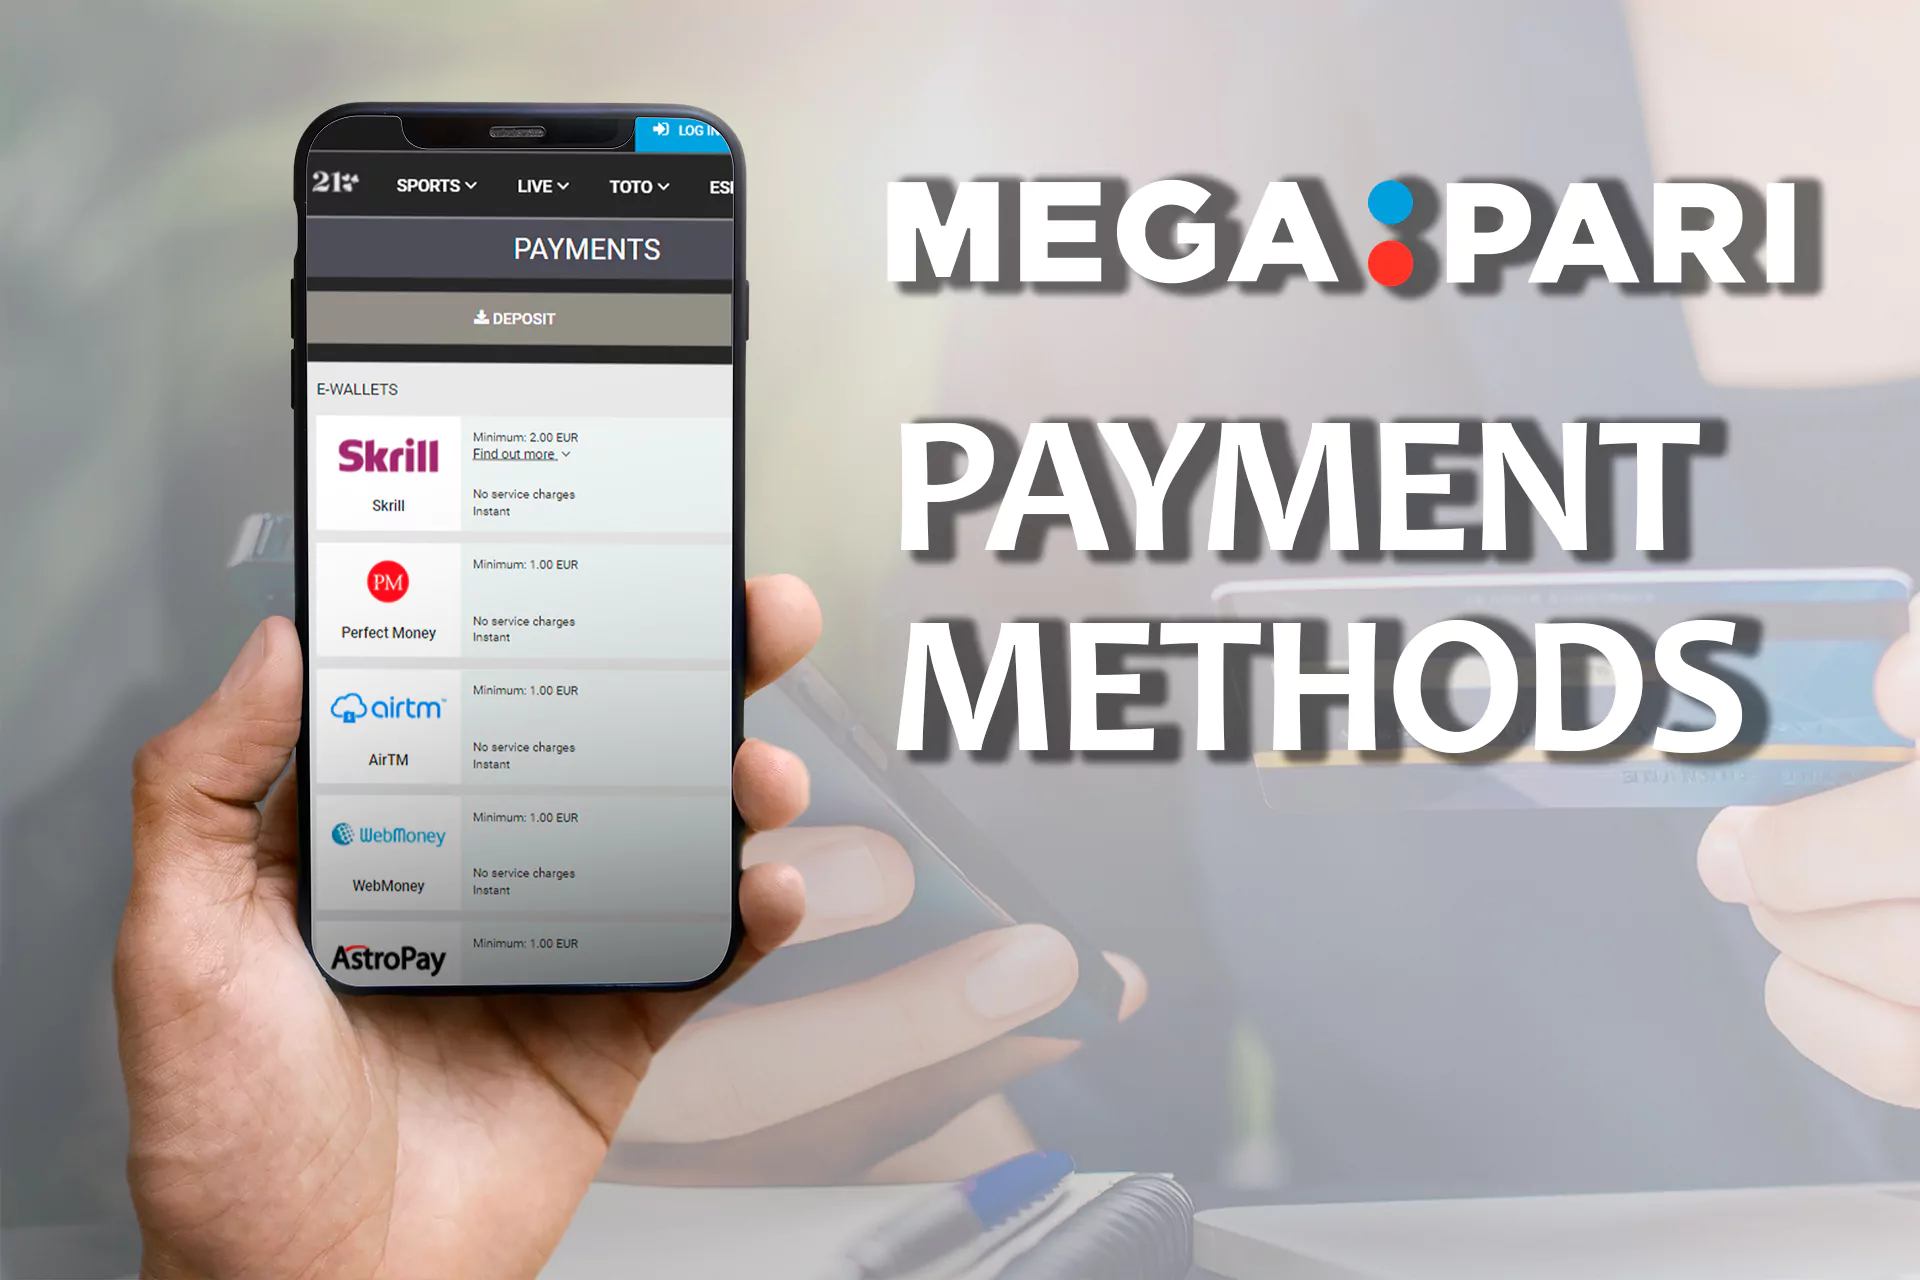 There are a lot of payment systems in the Megapari app.